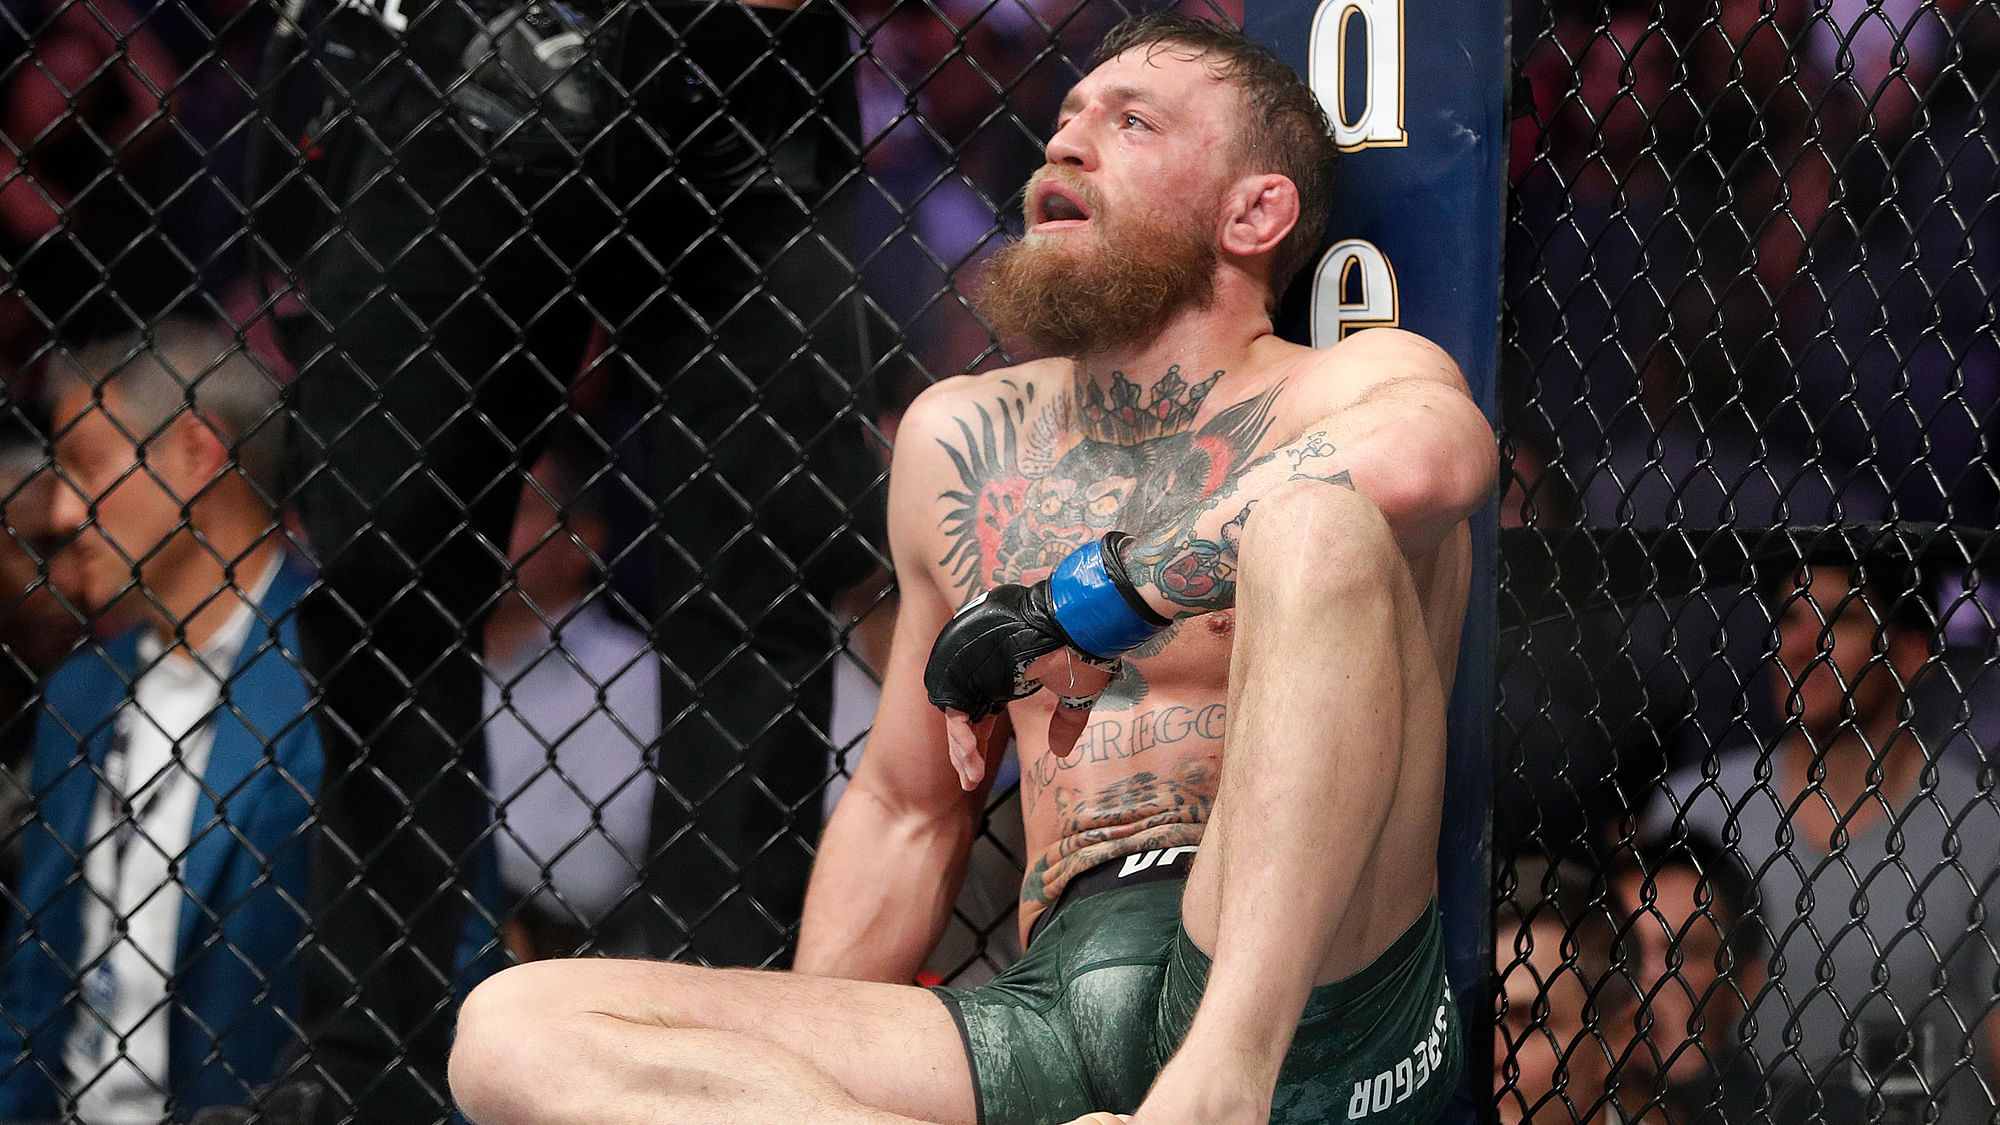 Conor McGregor reacts after losing to Khabib Nurmagomedov in a lightweight title mixed martial arts bout at UFC 229 in Las Vegas.